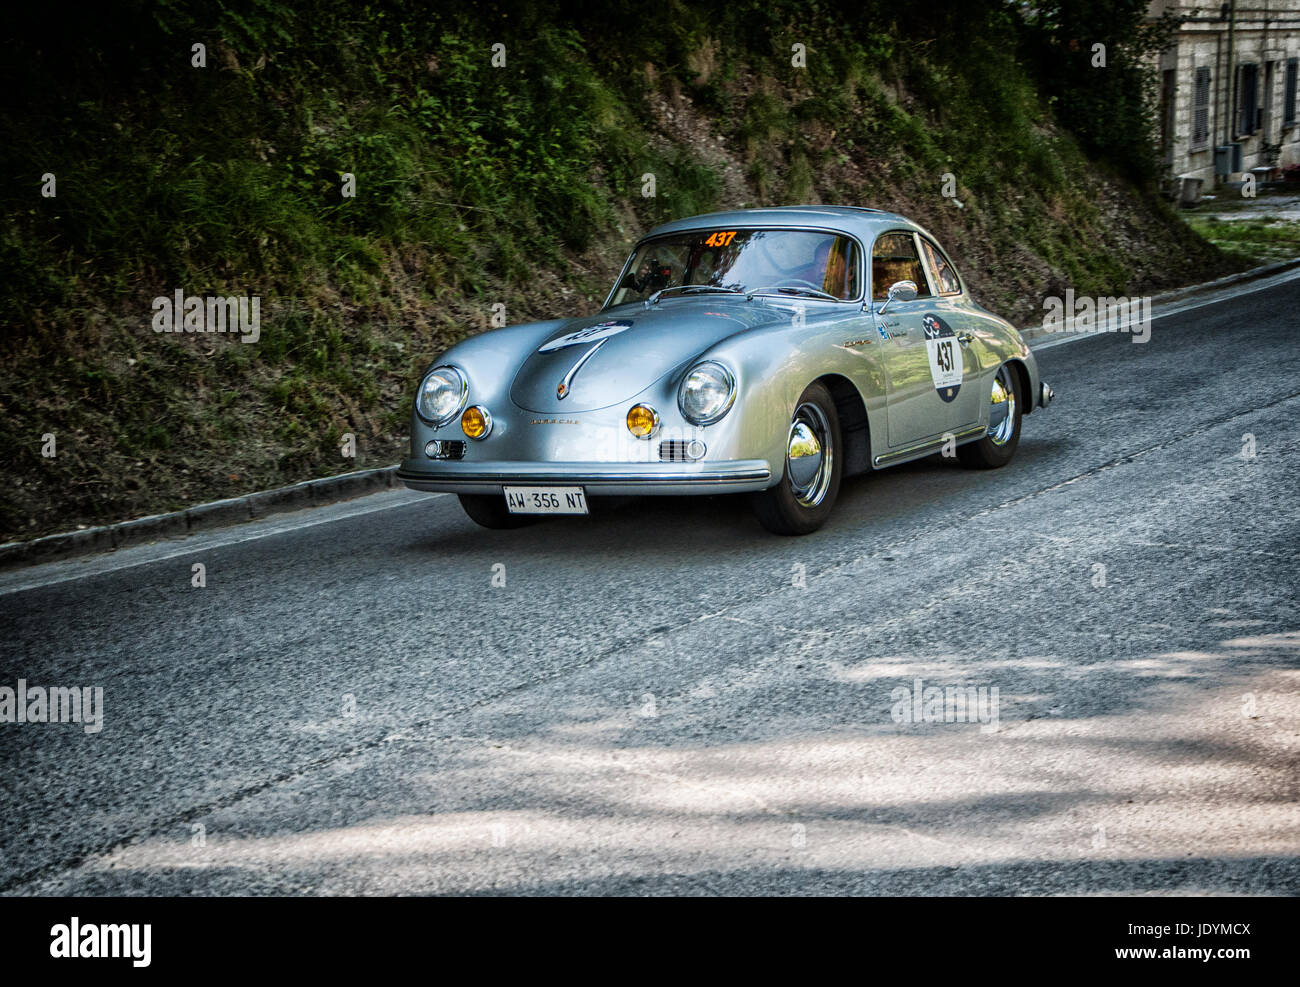 PORSCHE 356 A 1500 GS CARRERA 1956 on an old racing car in rally Mille  Miglia 2017 the famous italian historical race (1927-1957) on May 19 2017  Stock Photo - Alamy